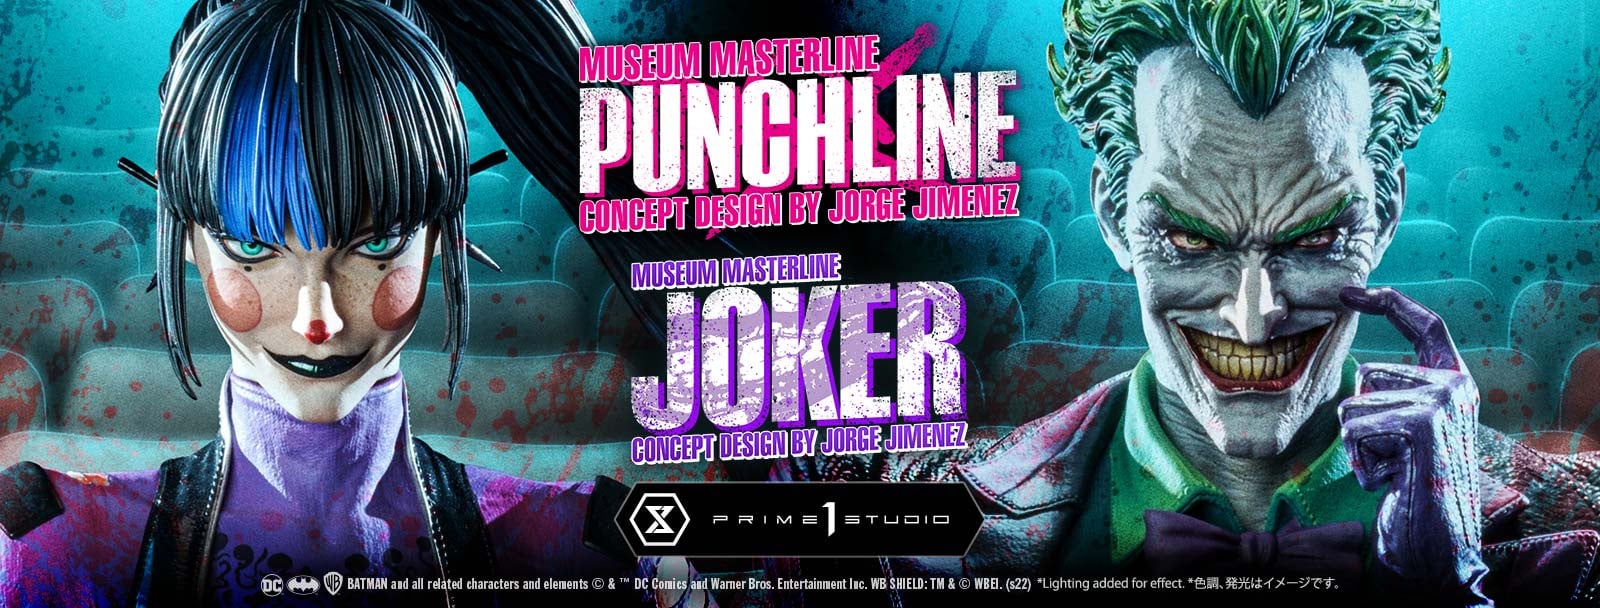 PUNCHLINE AND THE JOKER SPECIAL CAMPAIGN